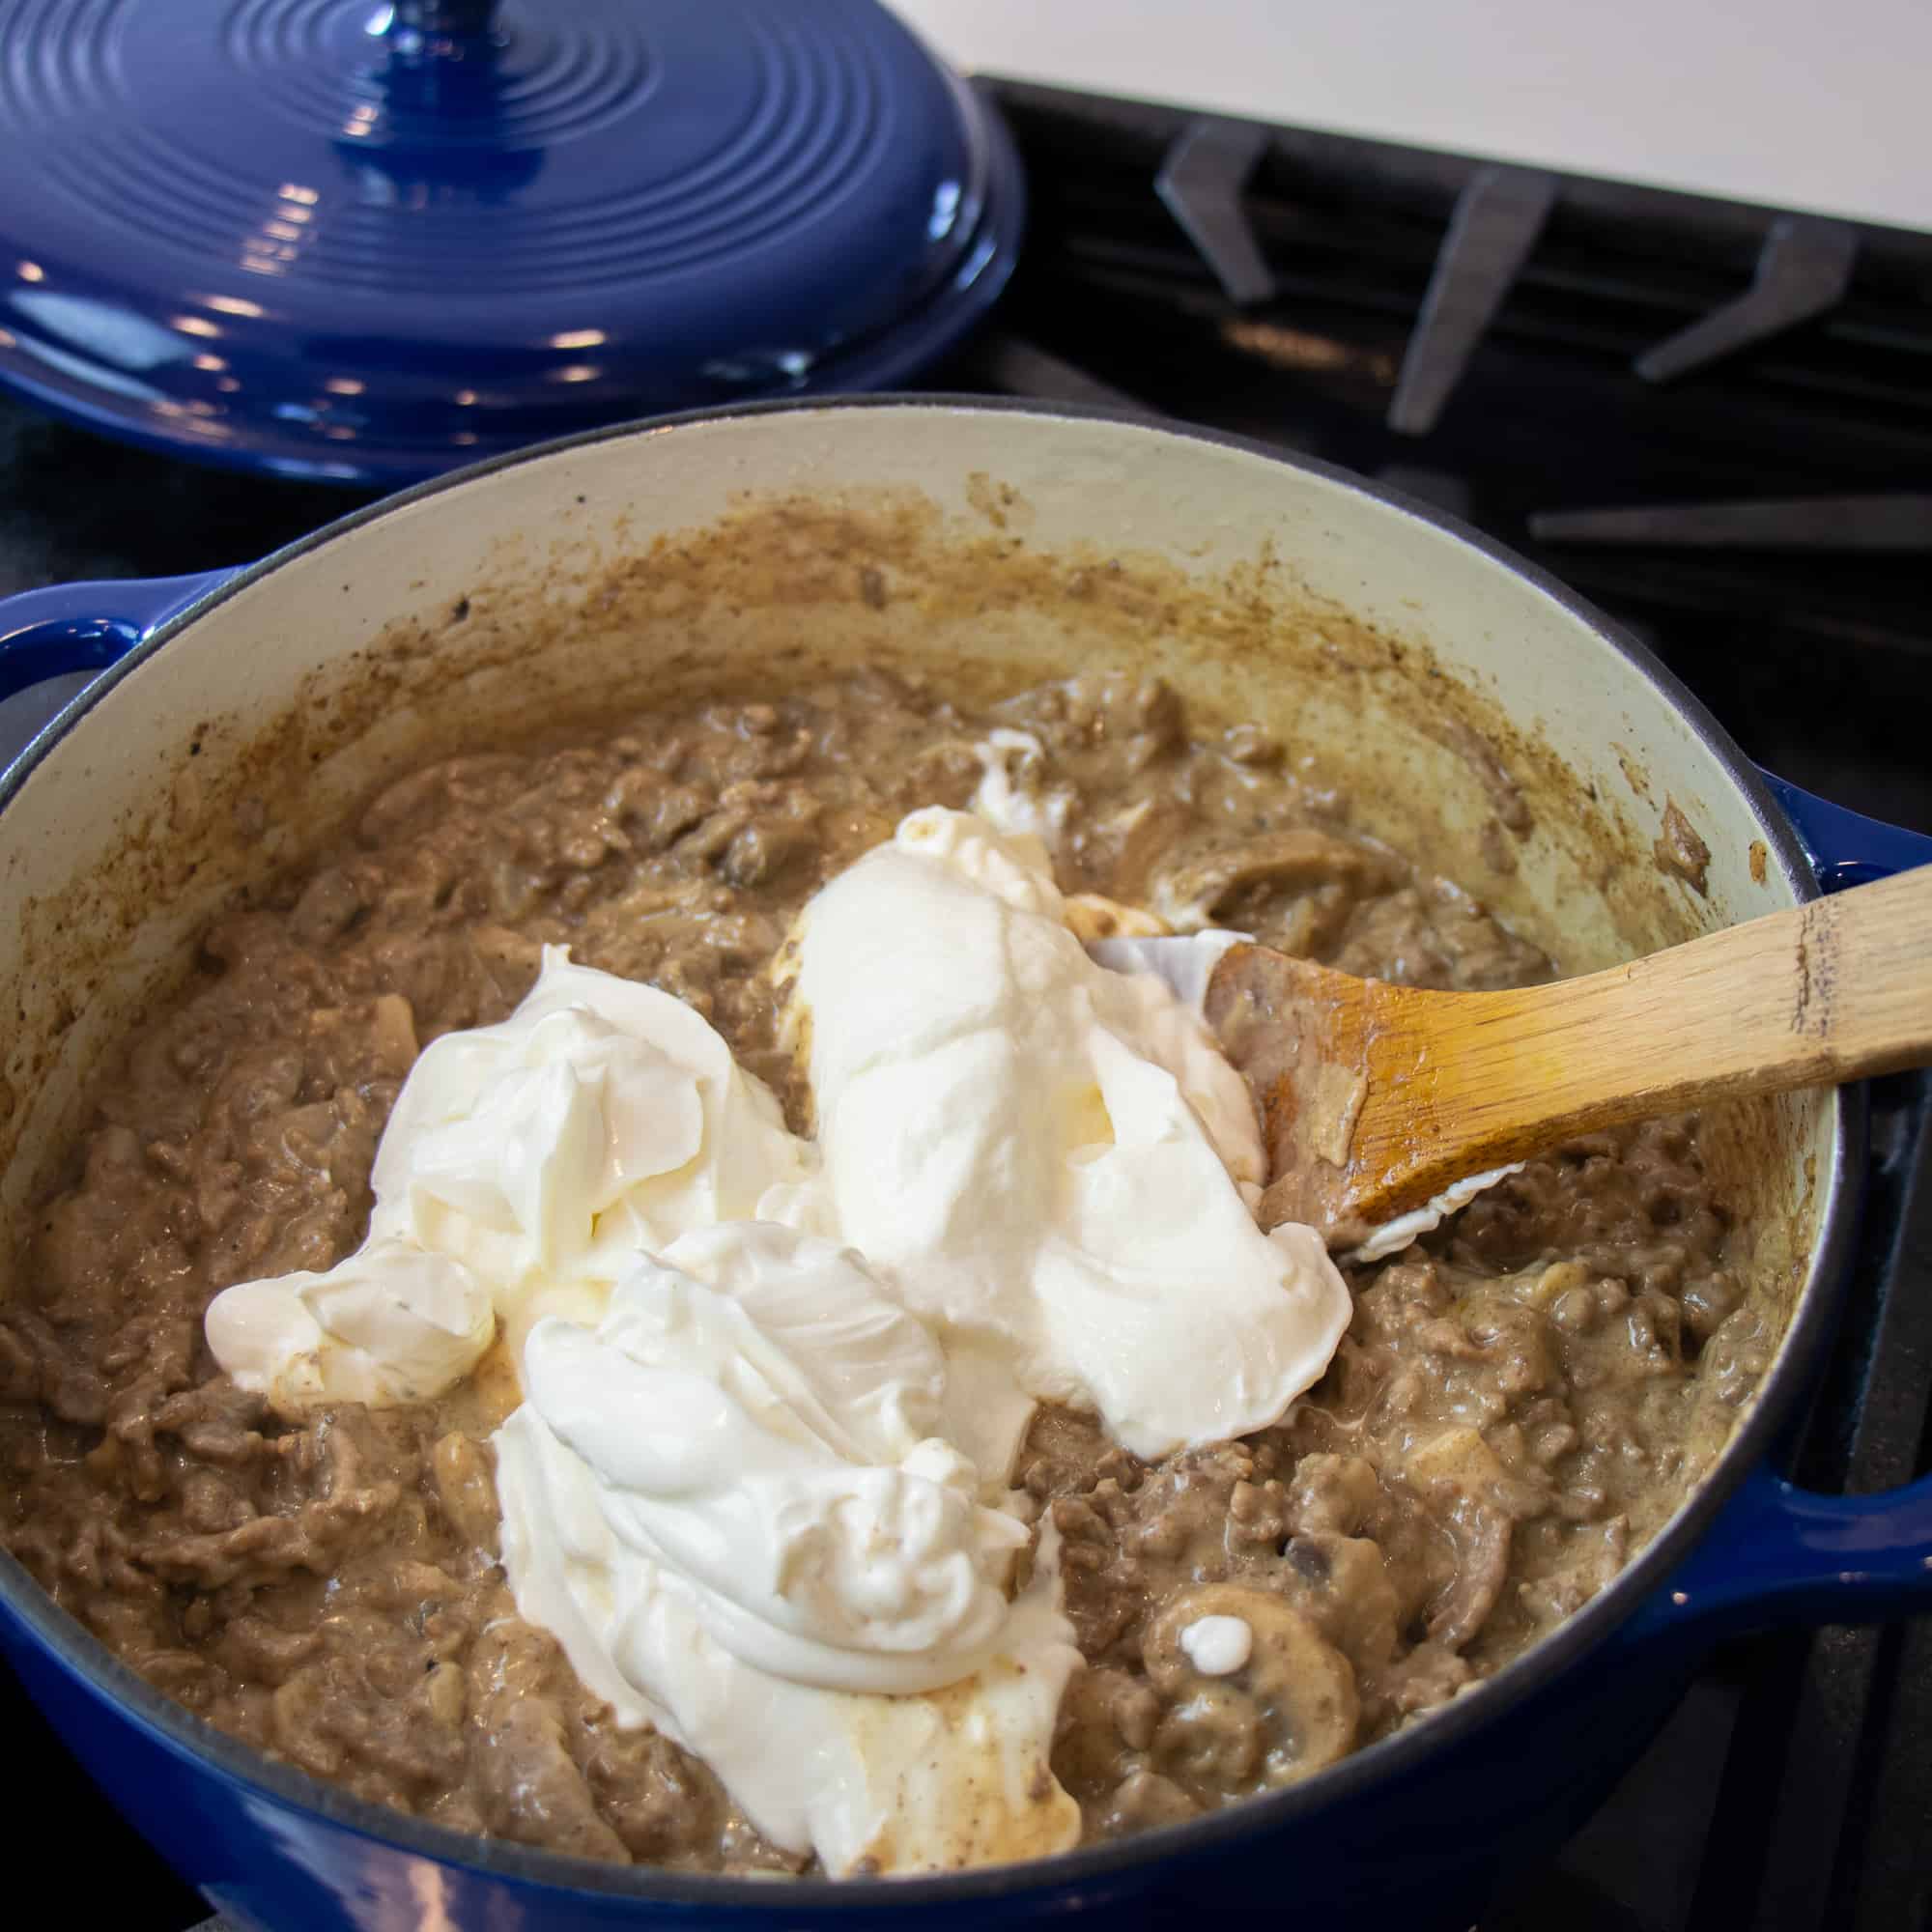 Add the sour cream to the pot and stir until smooth.